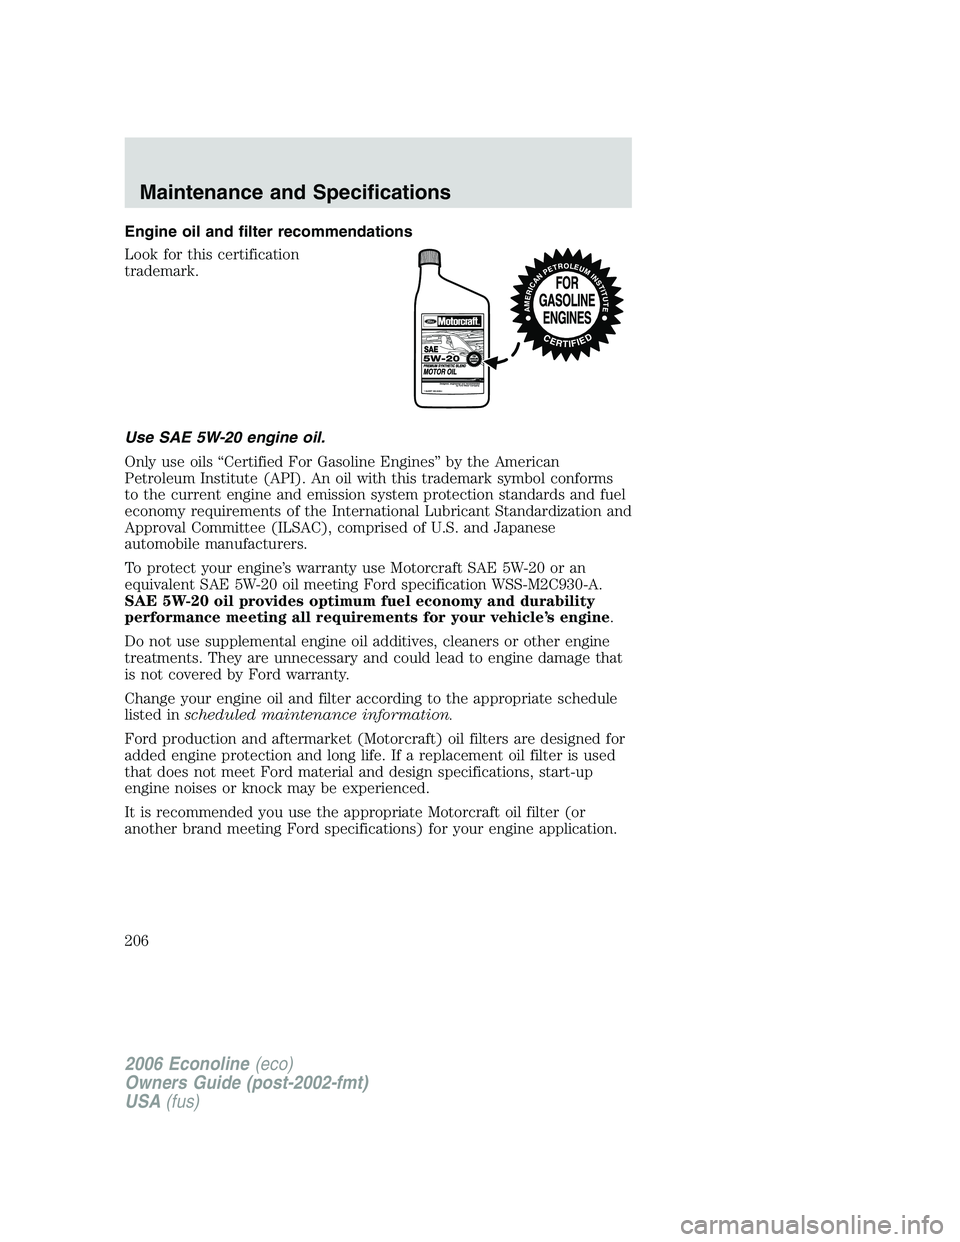 FORD E450 2006  Owners Manual Engine oil and filter recommendations
Look for this certification
trademark.
Use SAE 5W-20 engine oil.
Only use oils “Certified For Gasoline Engines” by the American
Petroleum Institute (API). An 